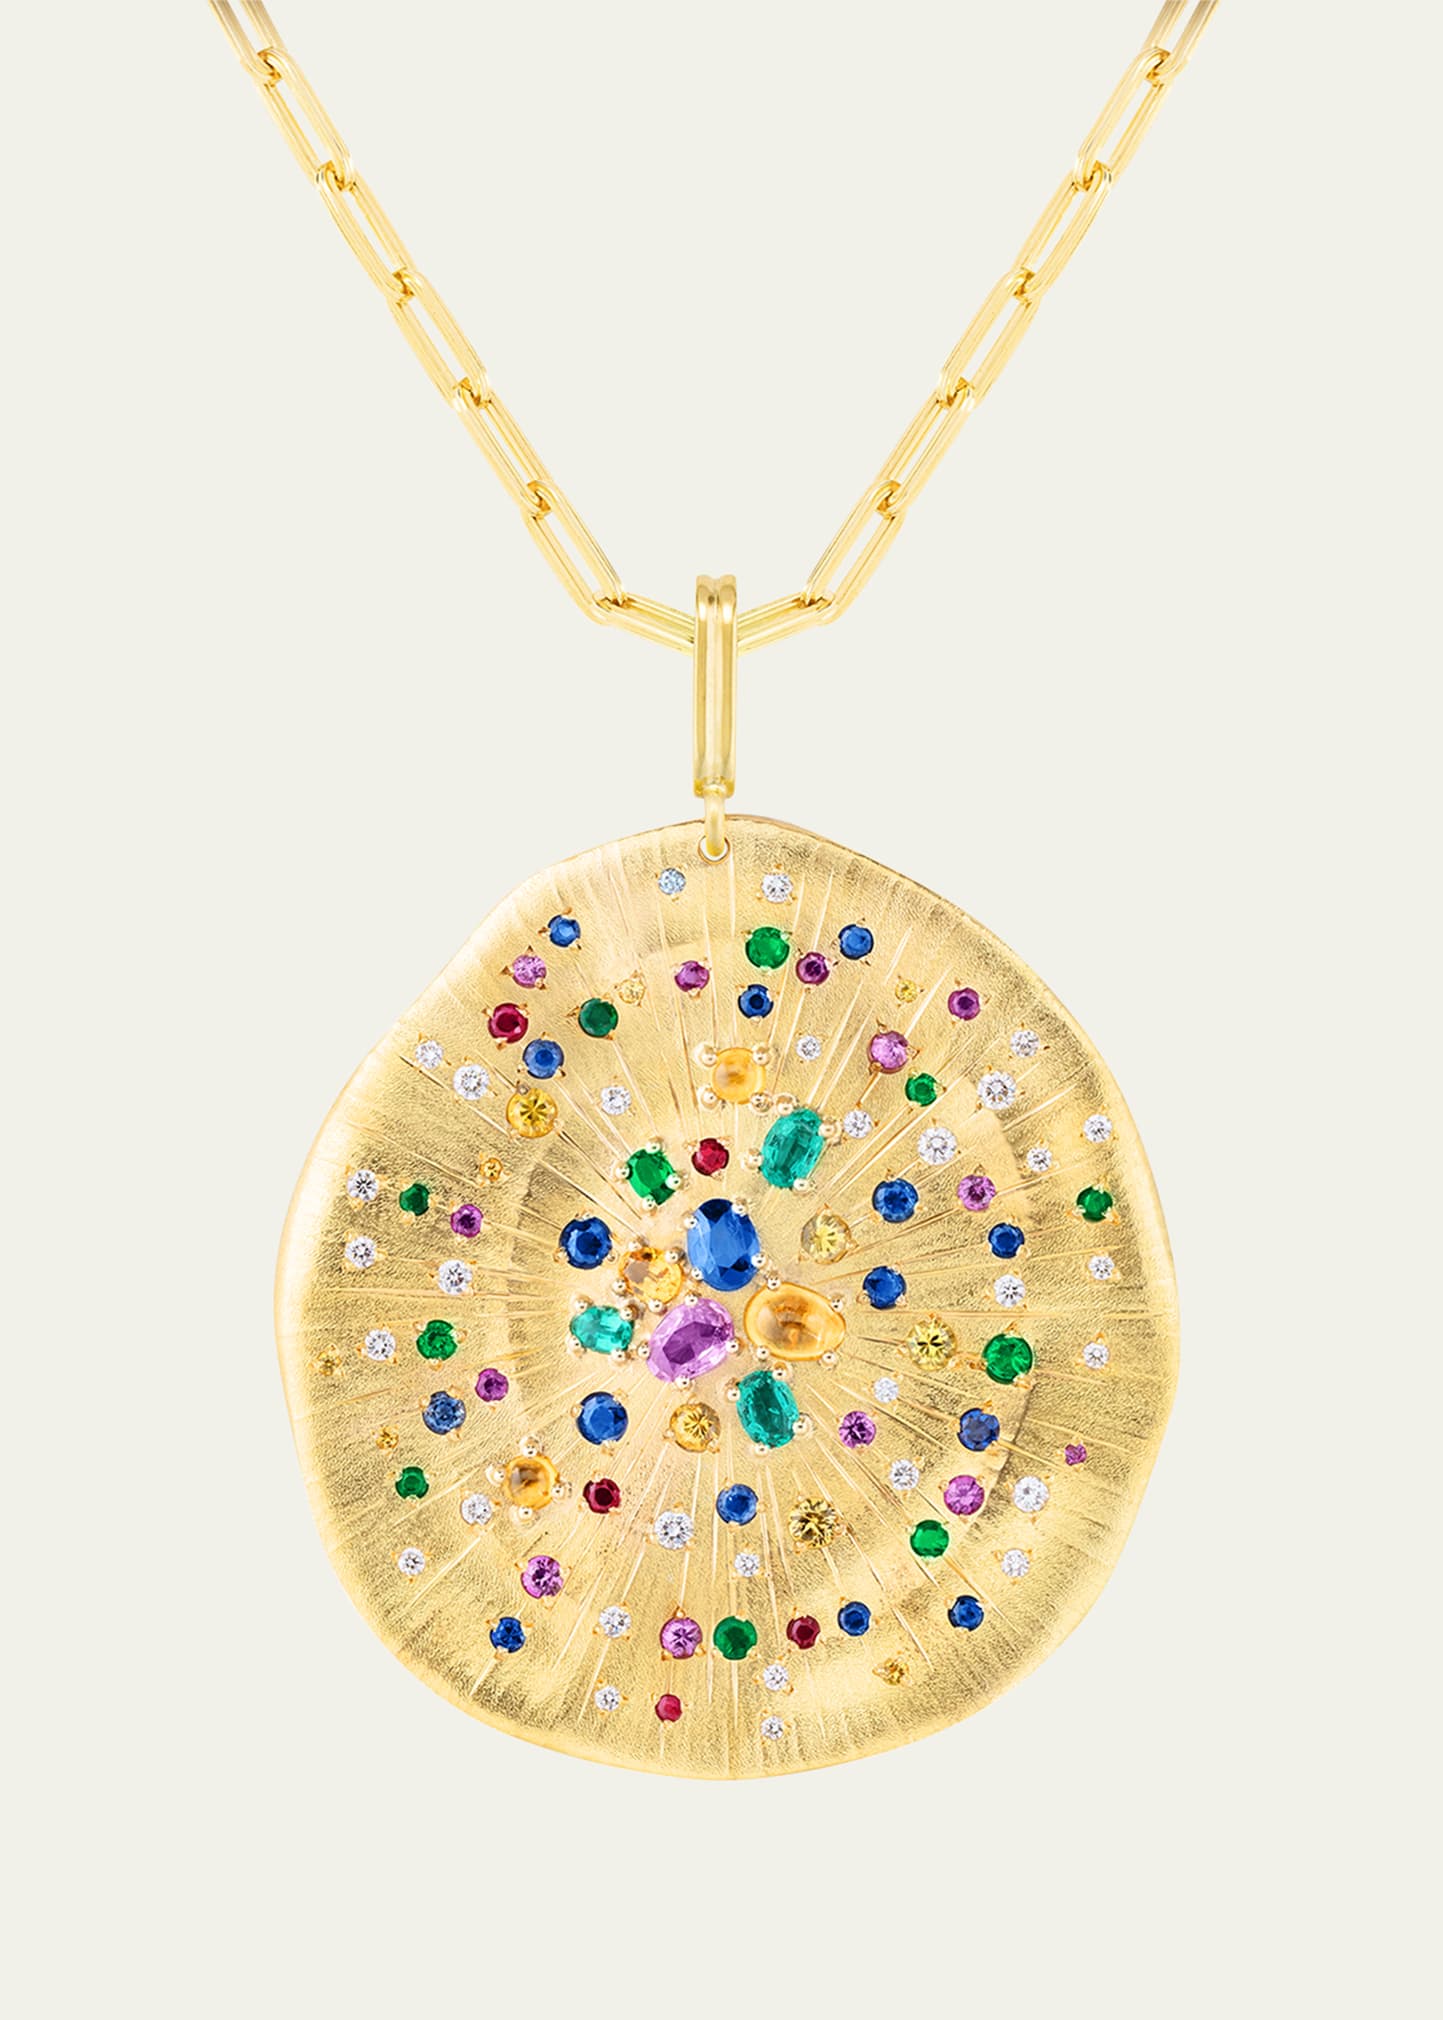 Mellerio 18k Yellow Gold Soleil Medal Necklace With Multicolor Sapphires, Emeralds, Rubies And Diamonds